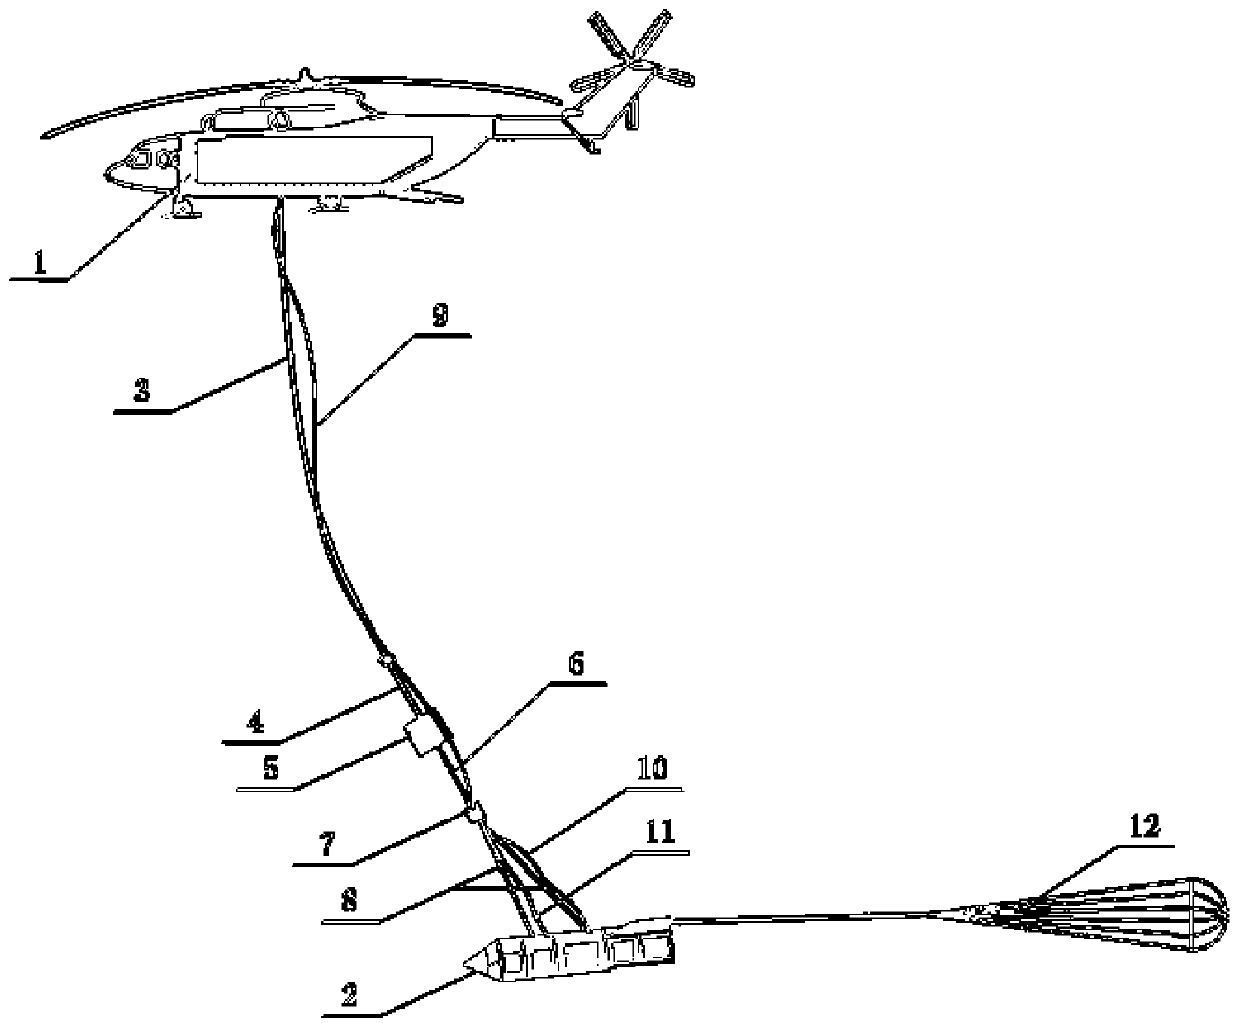 System and method for verifying infinite-mass parachute opening strength of parachute